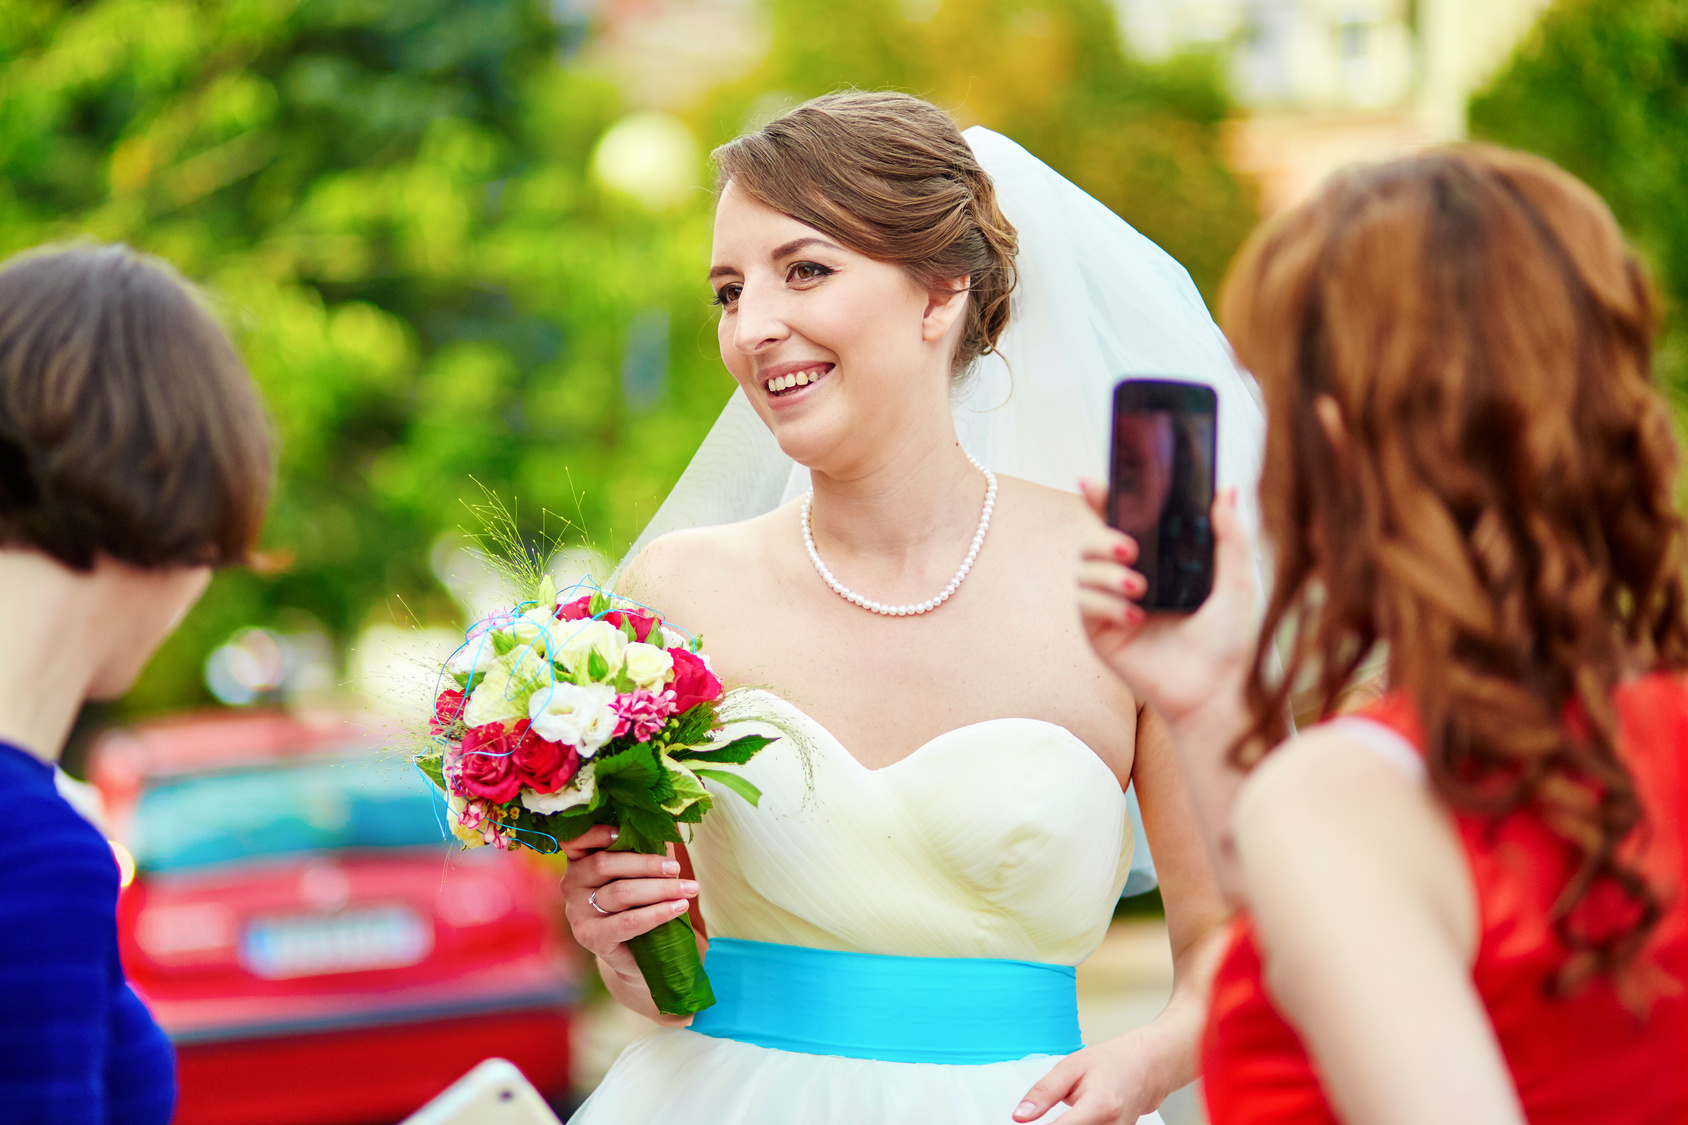 Bridesmaid is taking photo of a bride